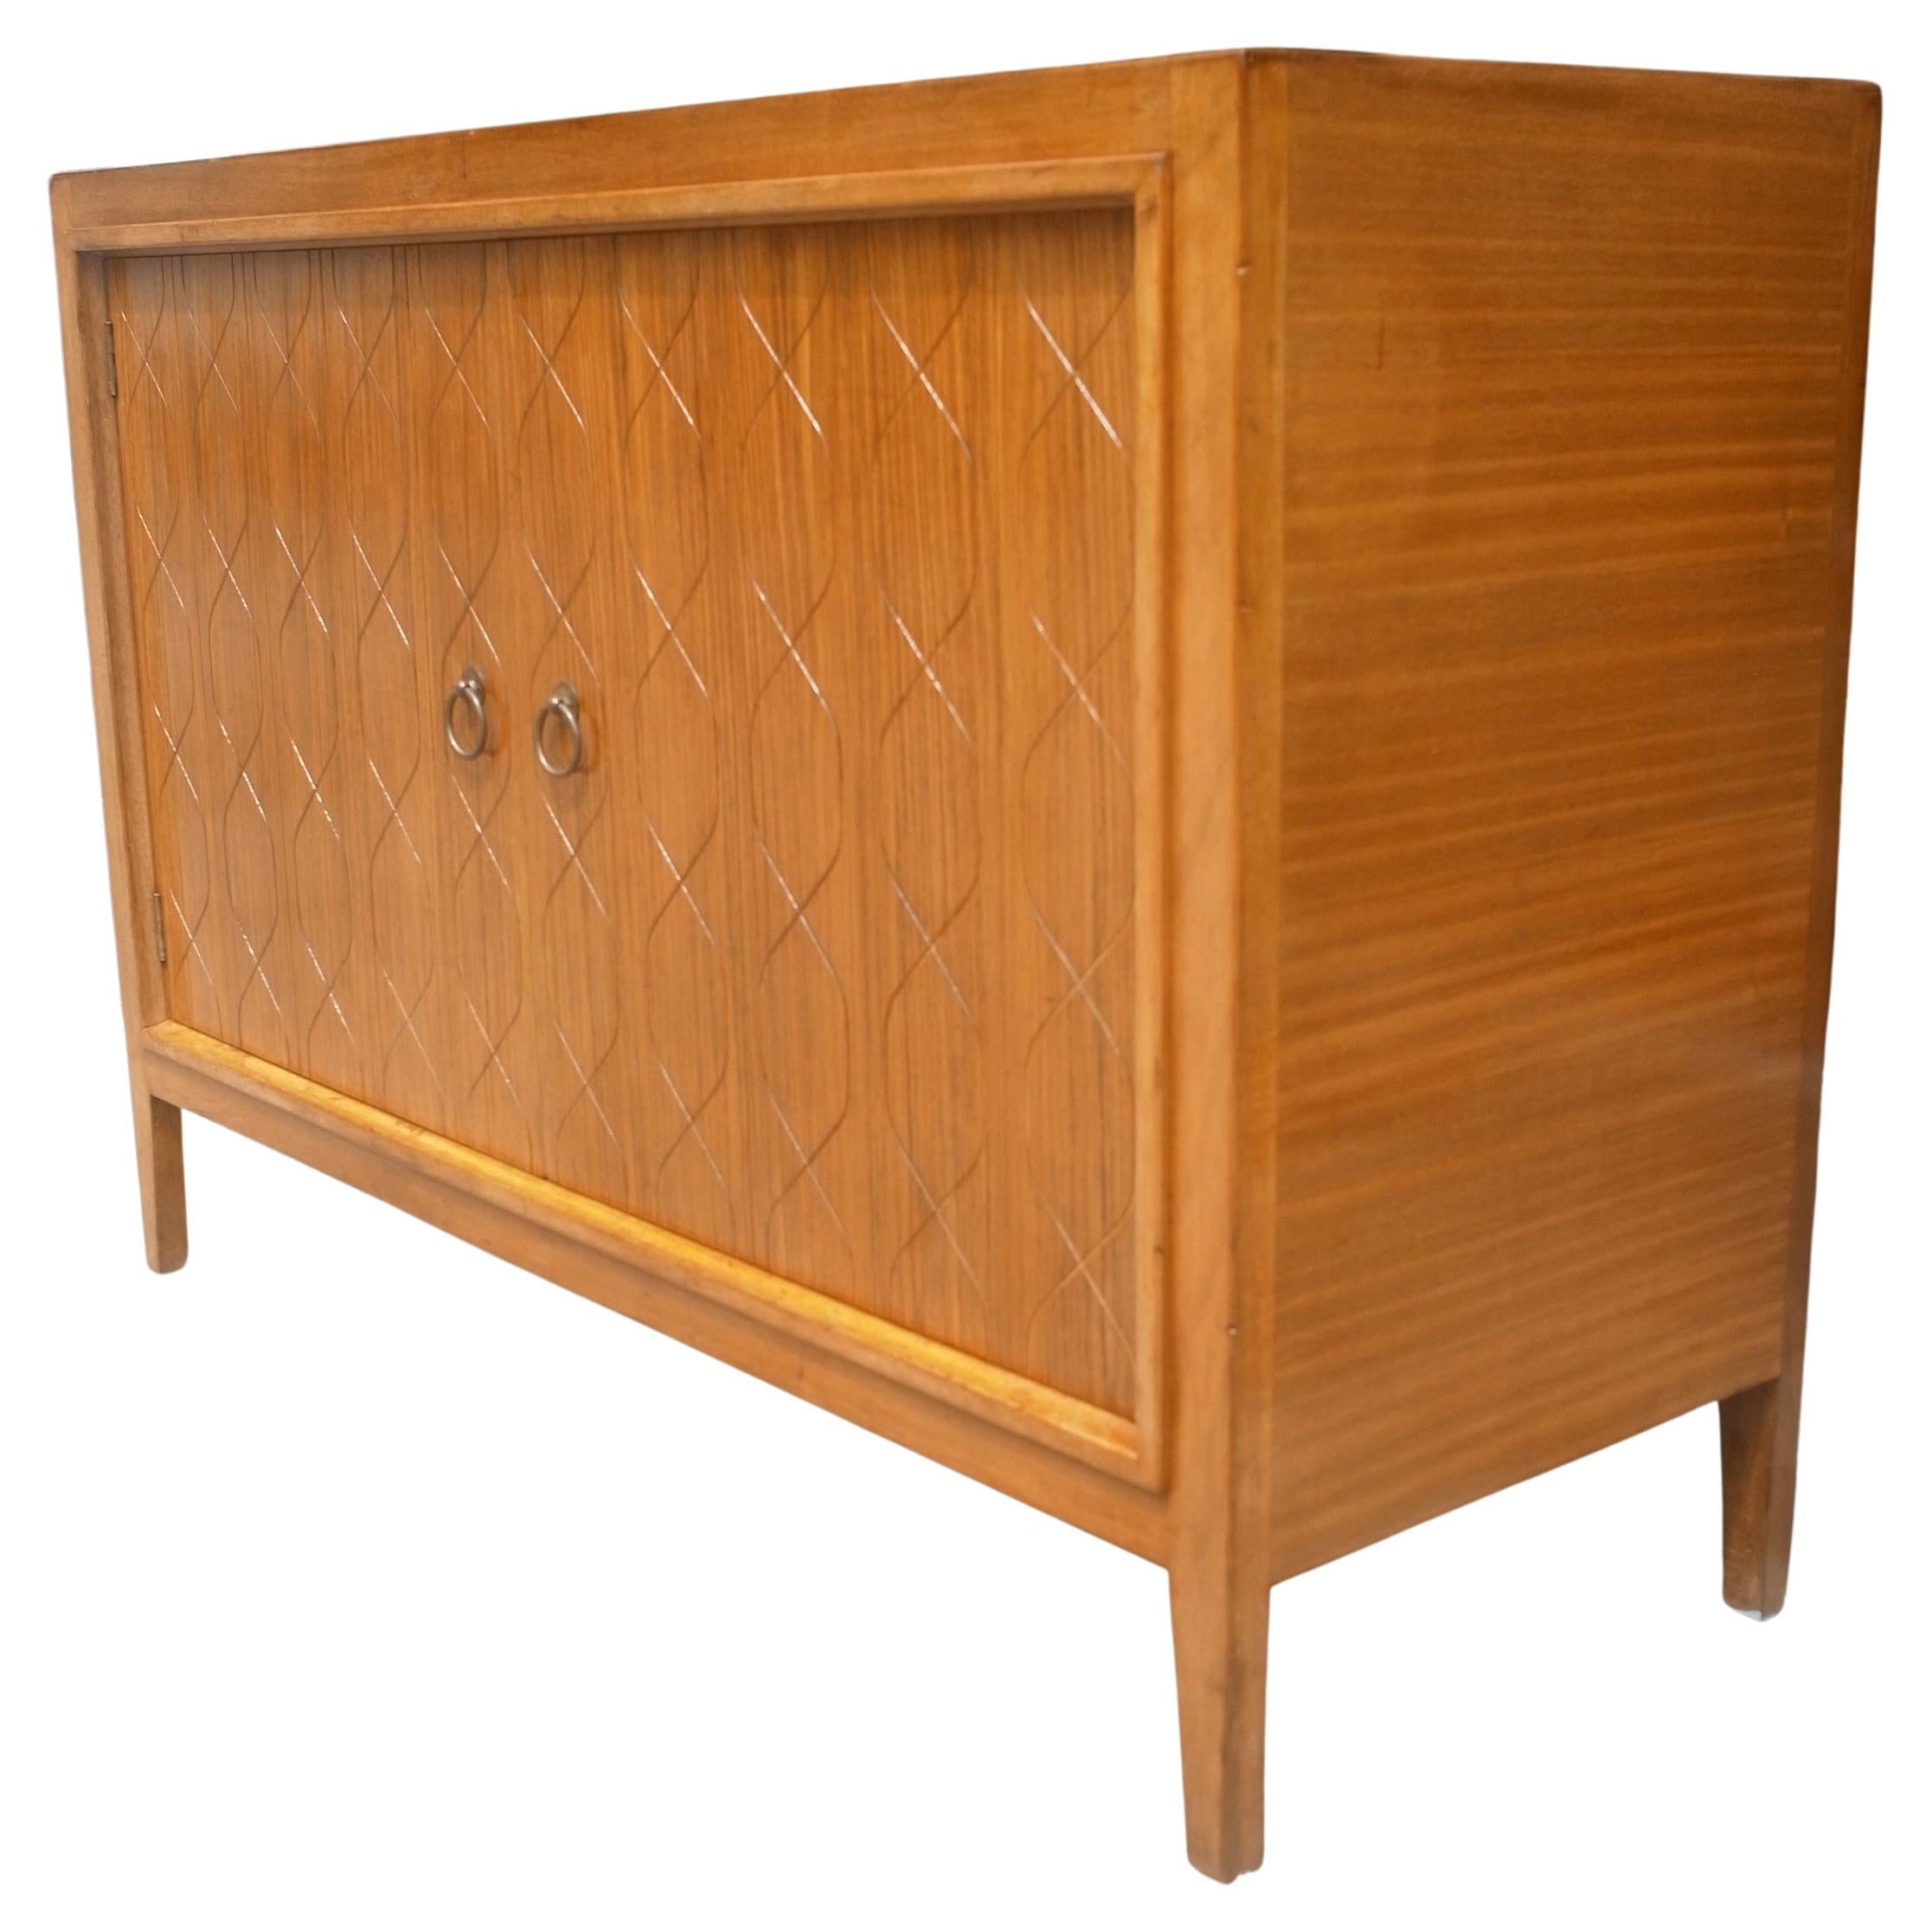 1950s Gordon Russell Hardwood and Mahogany "Double Helix' Sideboard For Sale